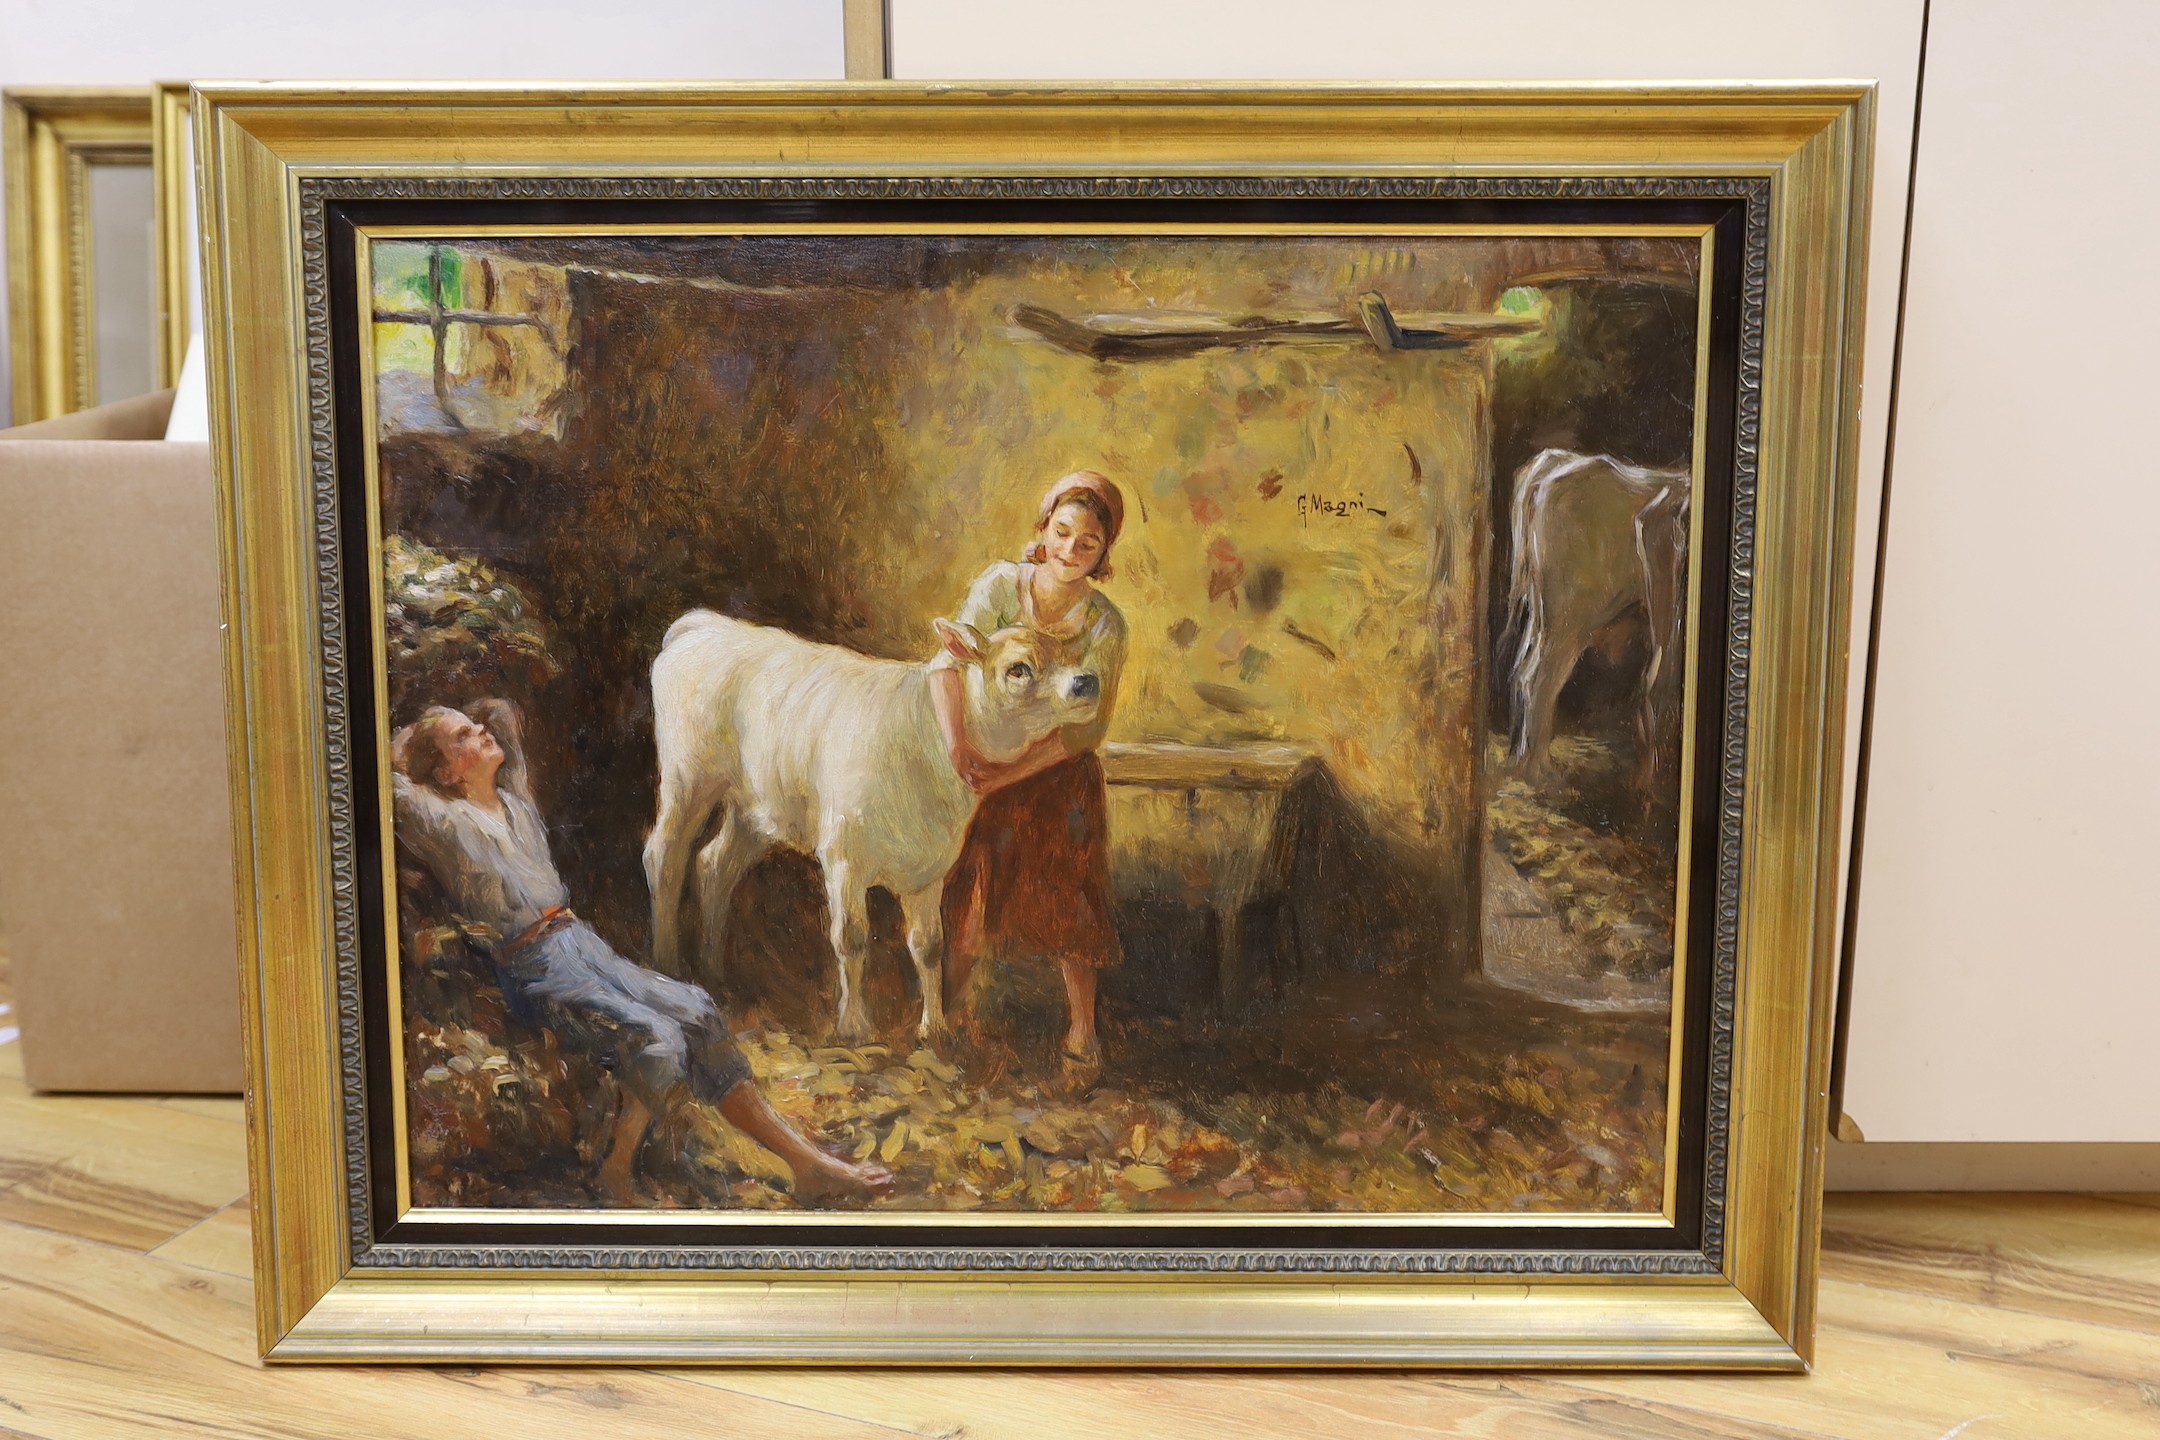 Giuseppe Magni (1869-1956), oil on canvas, farmyard interior with figures and cattle, signed, 49 x 64cm